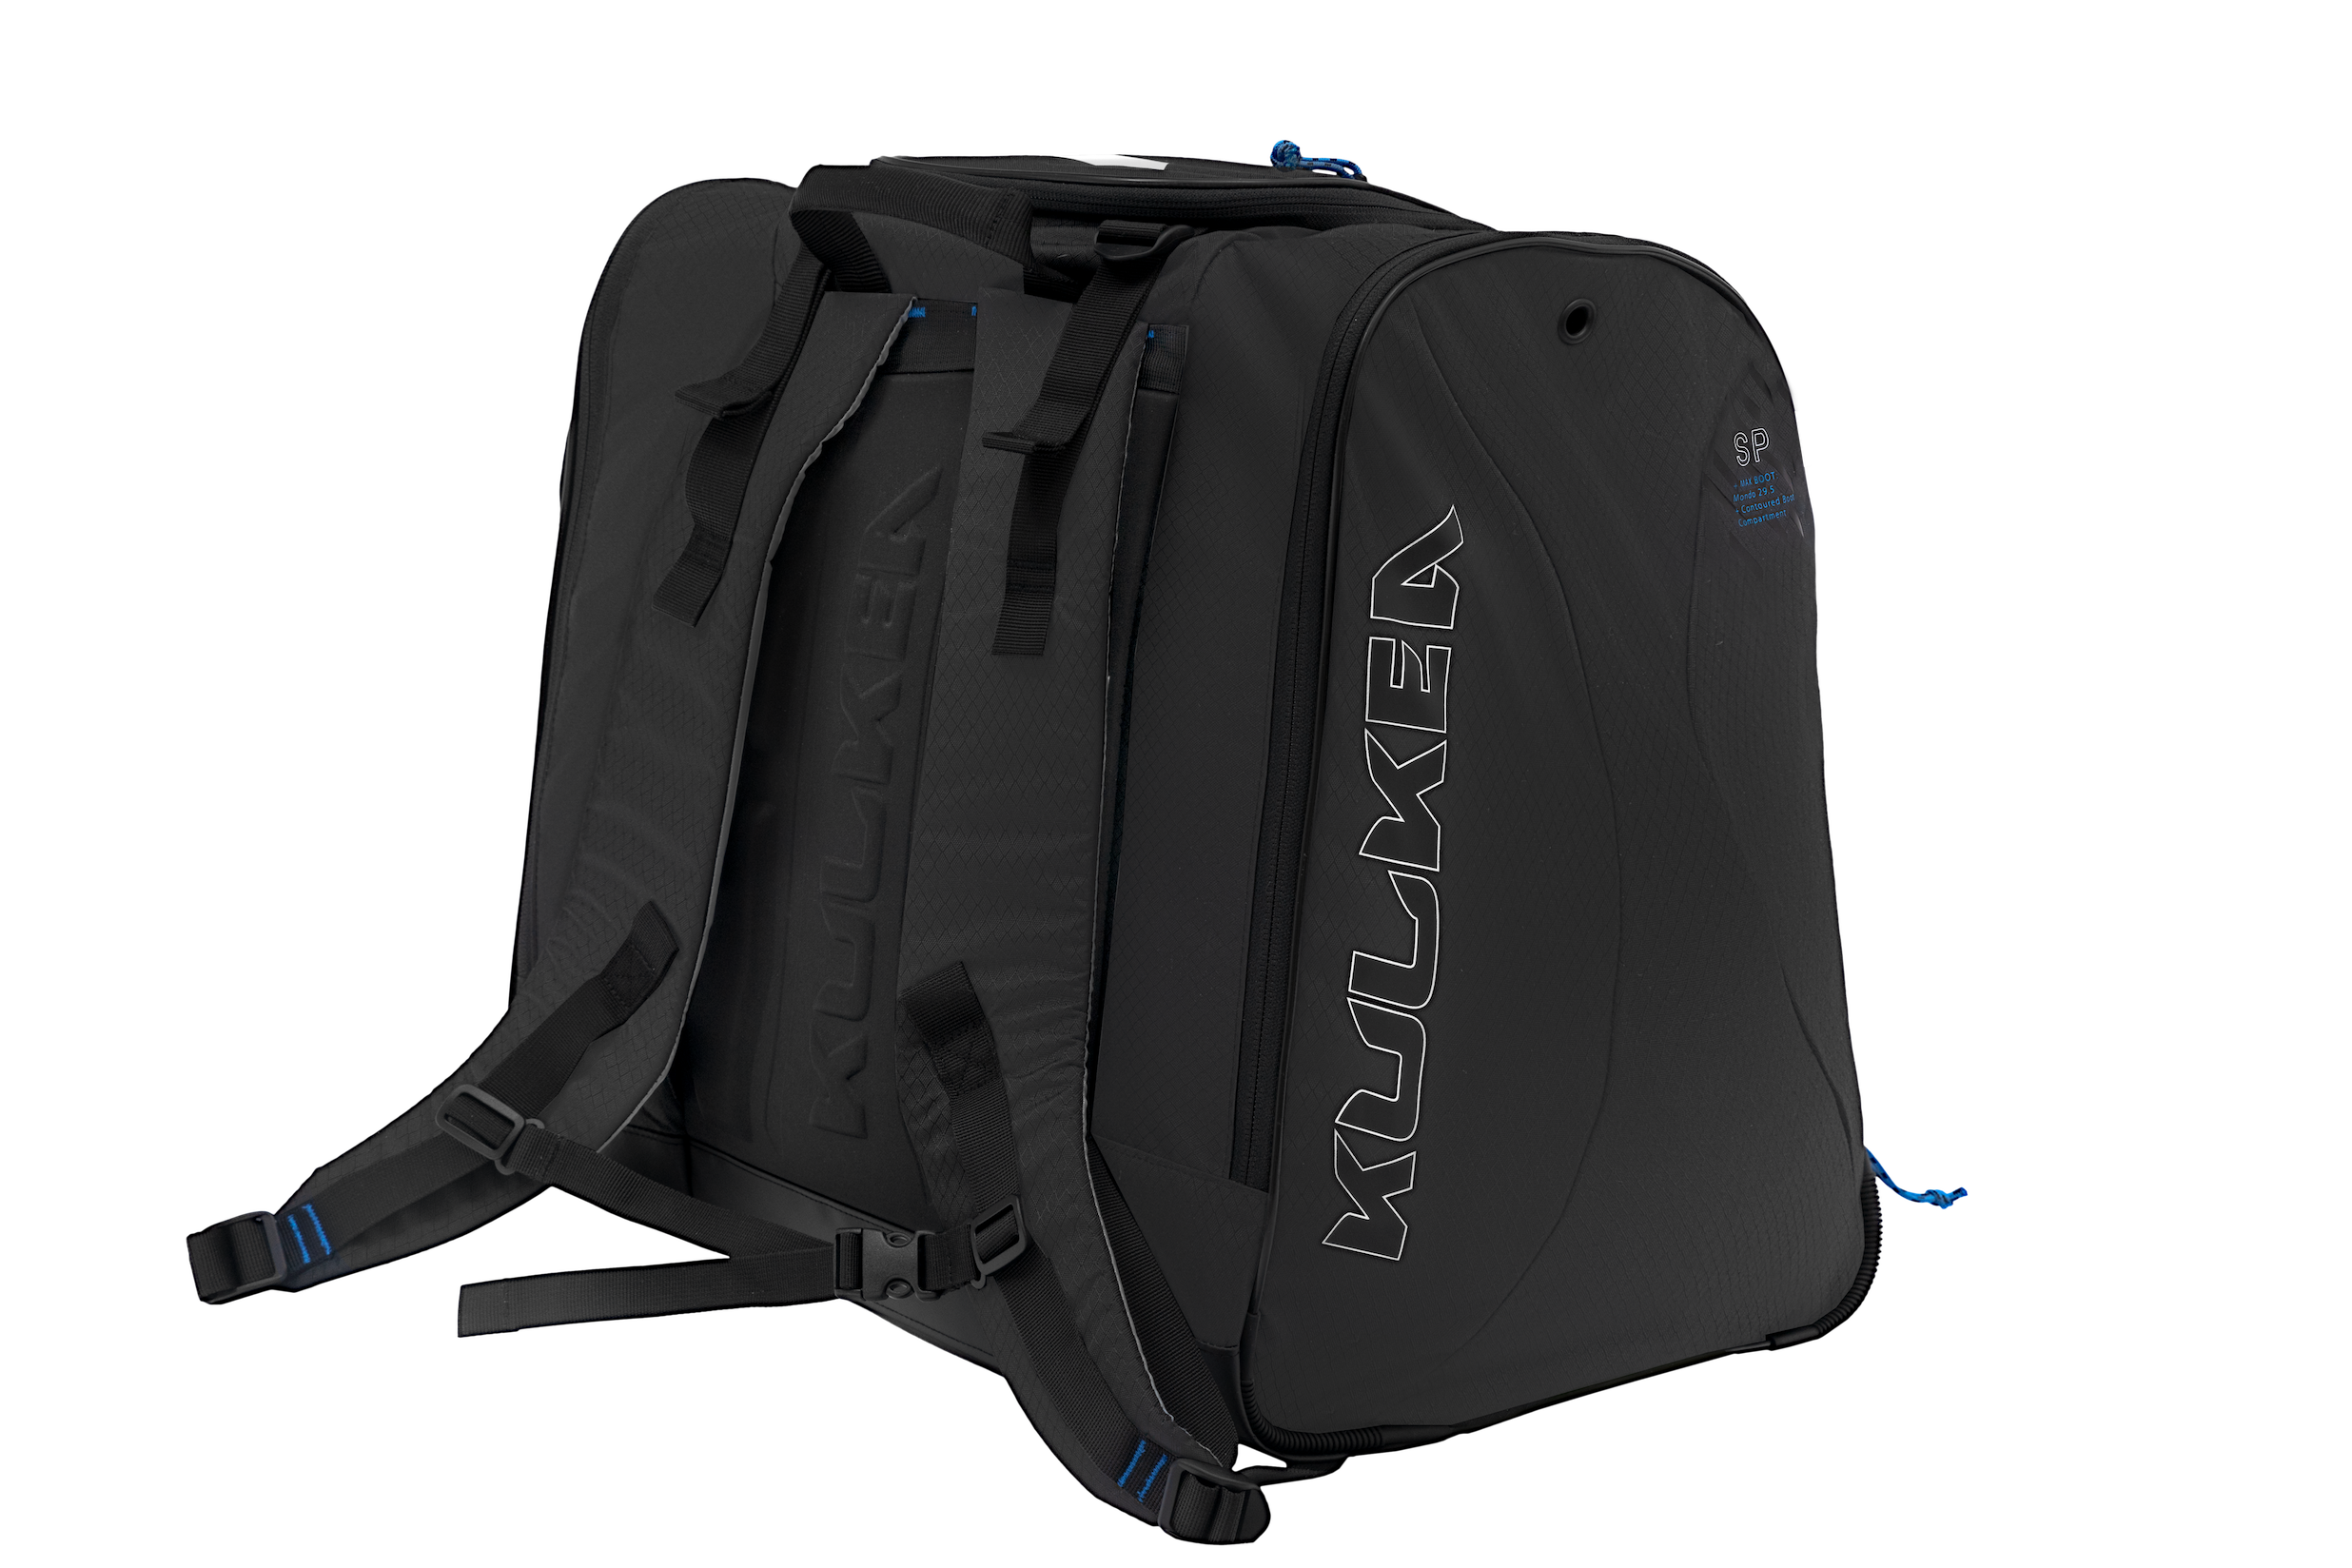 Kulkea boot bag all black with blue accents, smaller than the boot trekker bag, big enough to fit ski boots, helmet, gloves, etc. 